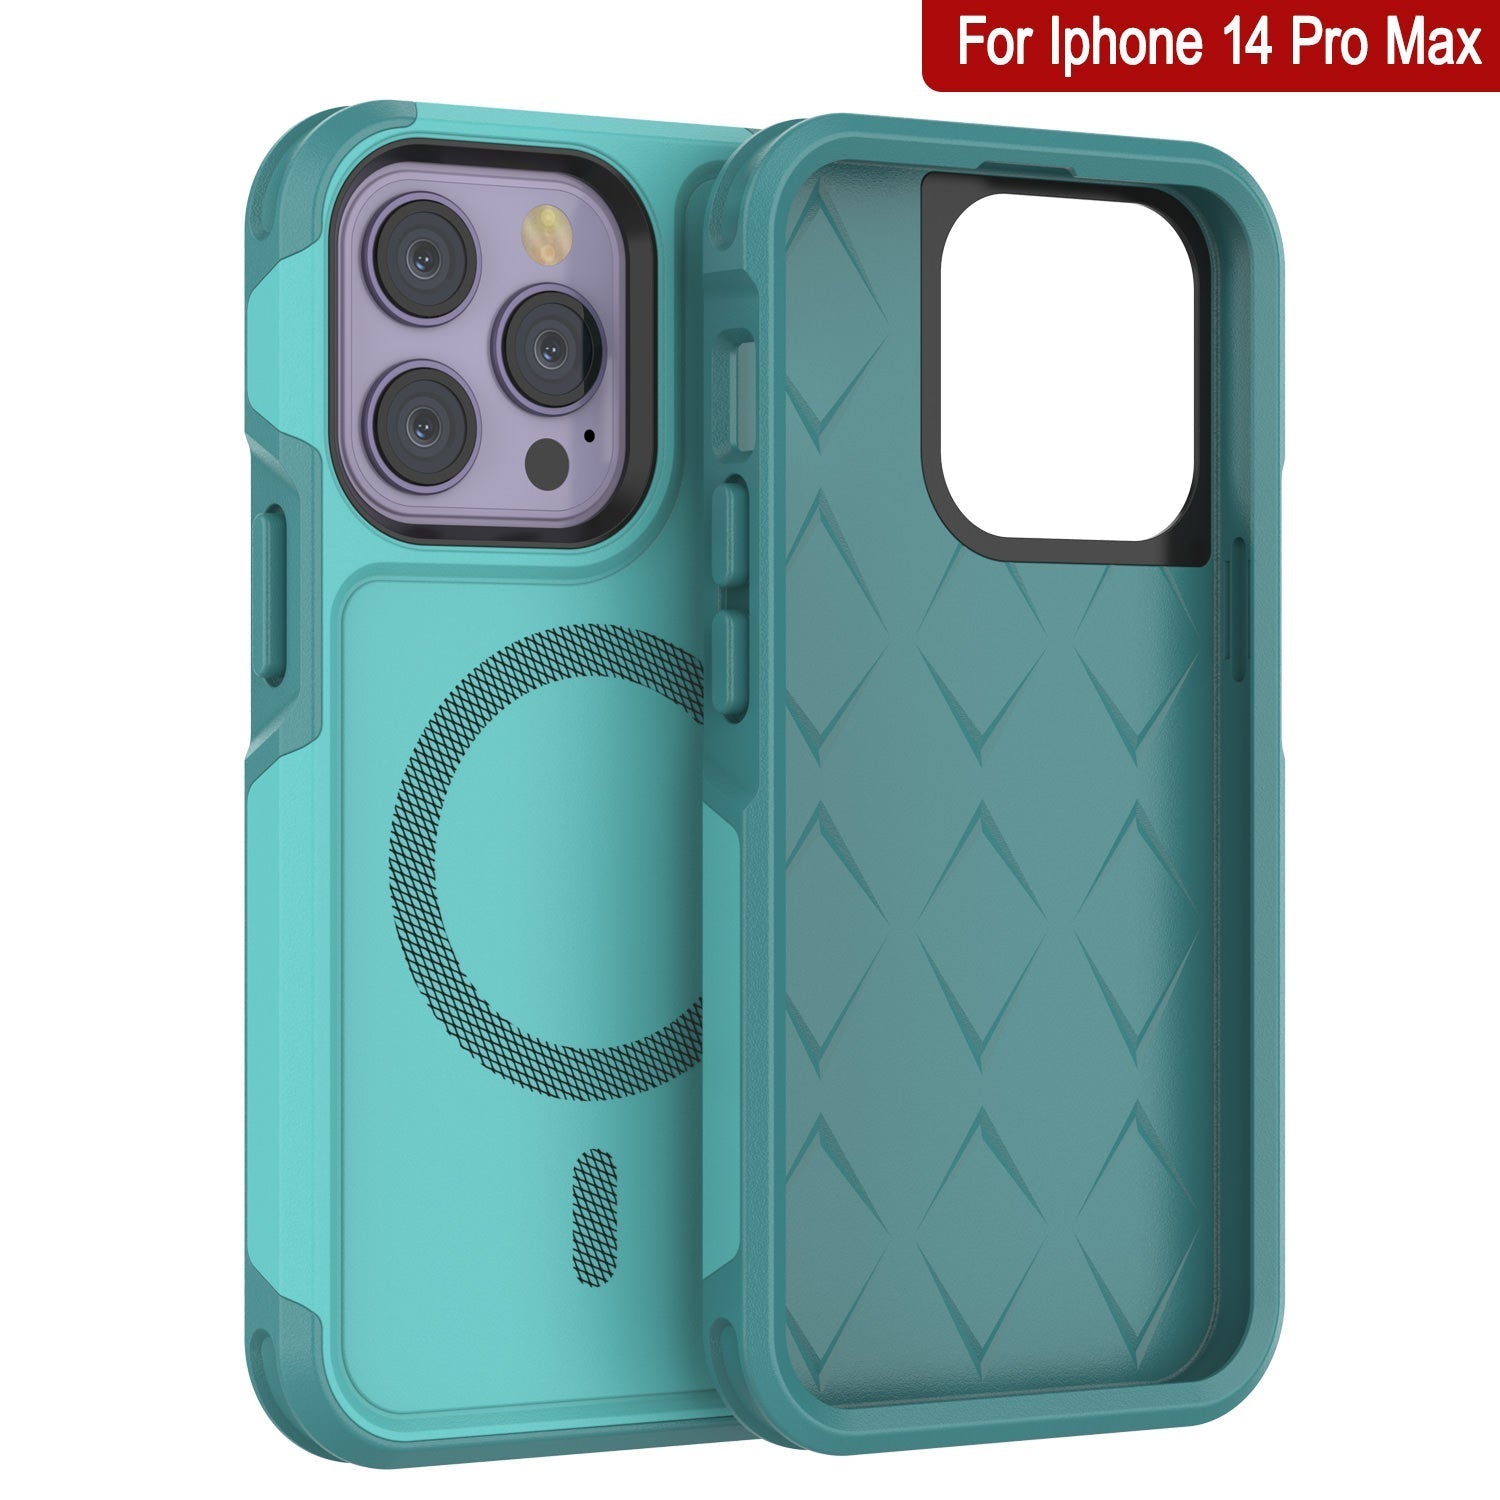 PunkCase iPhone 14 Pro Max Case, [Spartan 2.0 Series] Clear Rugged Heavy Duty Cover W/Built in Screen Protector [Blue]